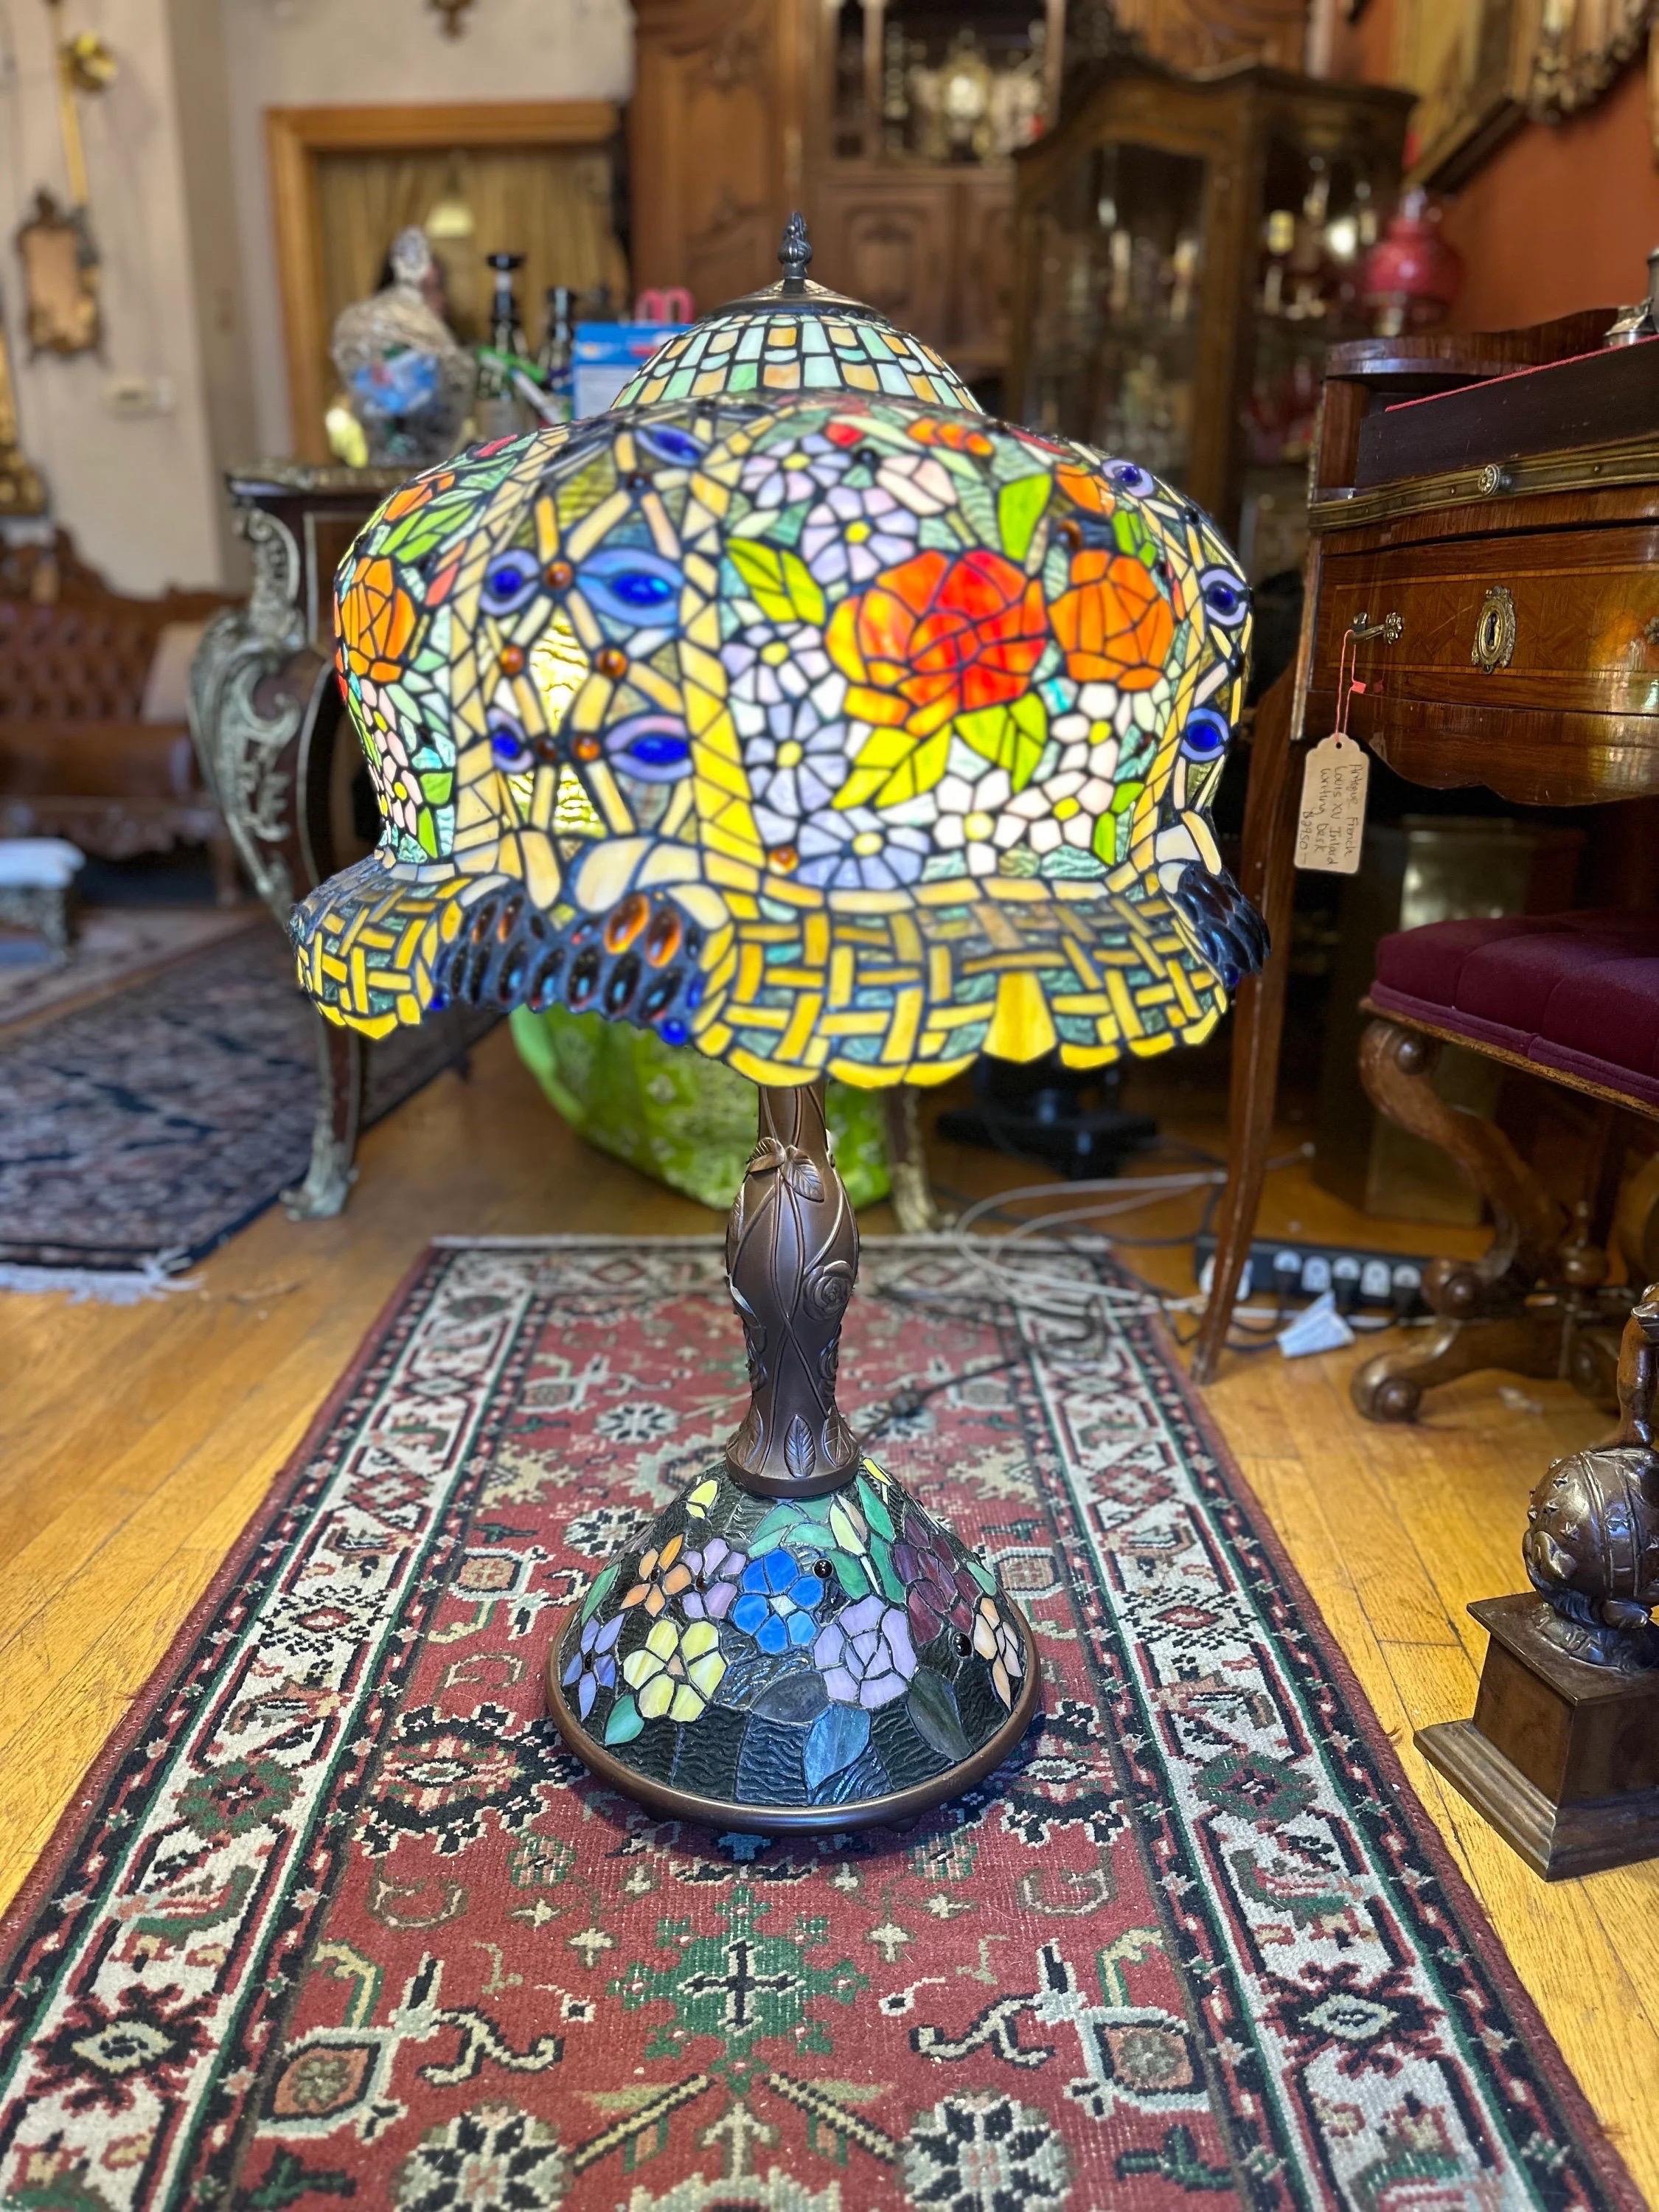 Vintage Art Nouveau Tiffany & Co Inspired Stained Glass Zinnia and Flower Table Lamp

This stunning lamp epitomizes elegance with its intricate Zinnia and Flower design, reminiscent of the iconic Tiffany & Co. brand. Crafted from stained glass, it